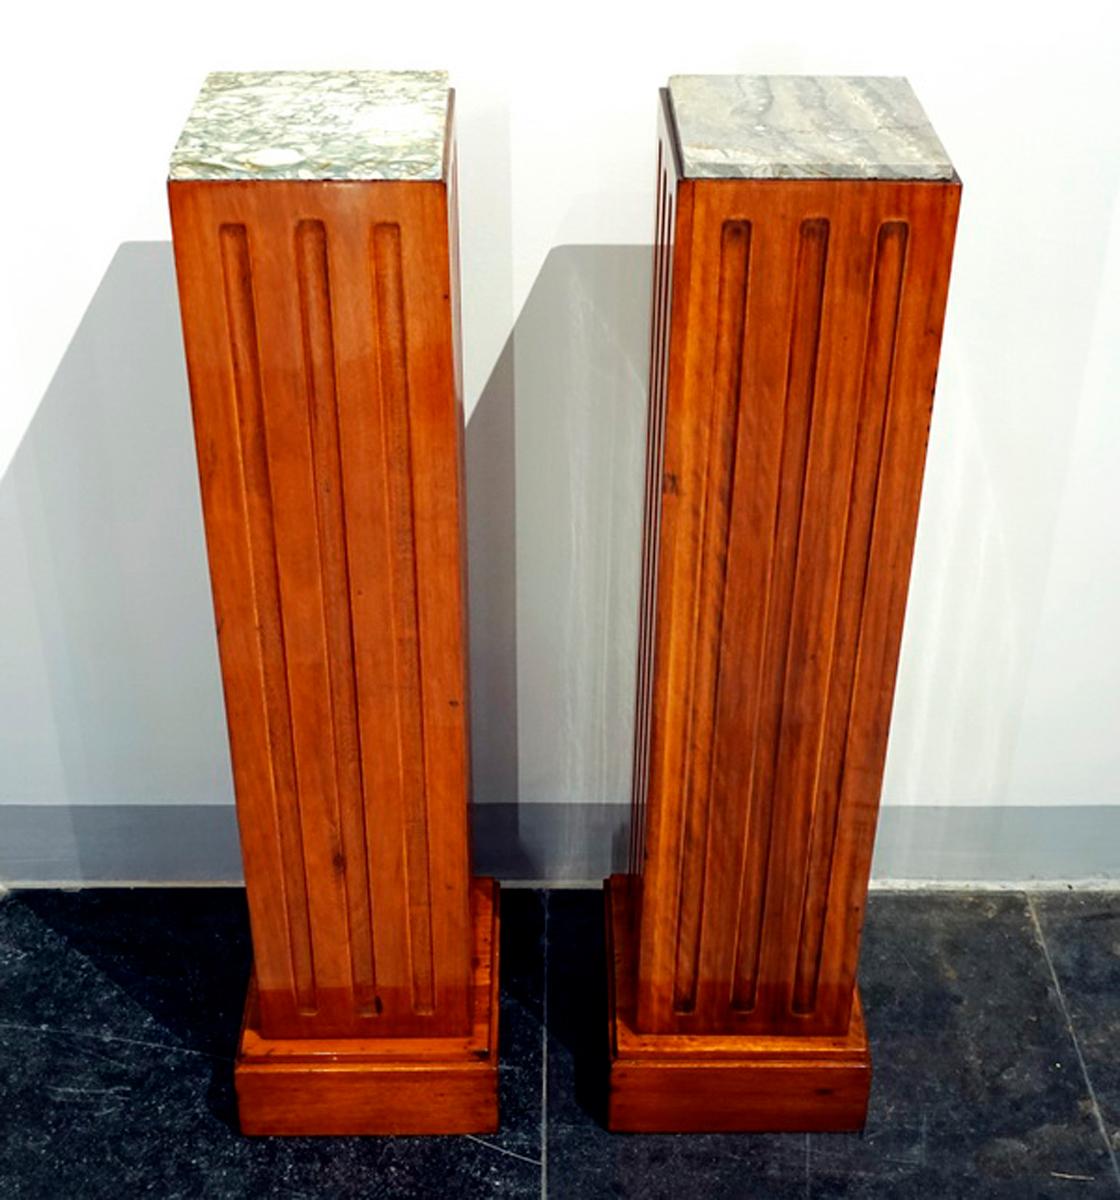 Art Deco Pair of Art Déco Pedestals, Mahogany stained, With Marble Pads, France, ca. 1930